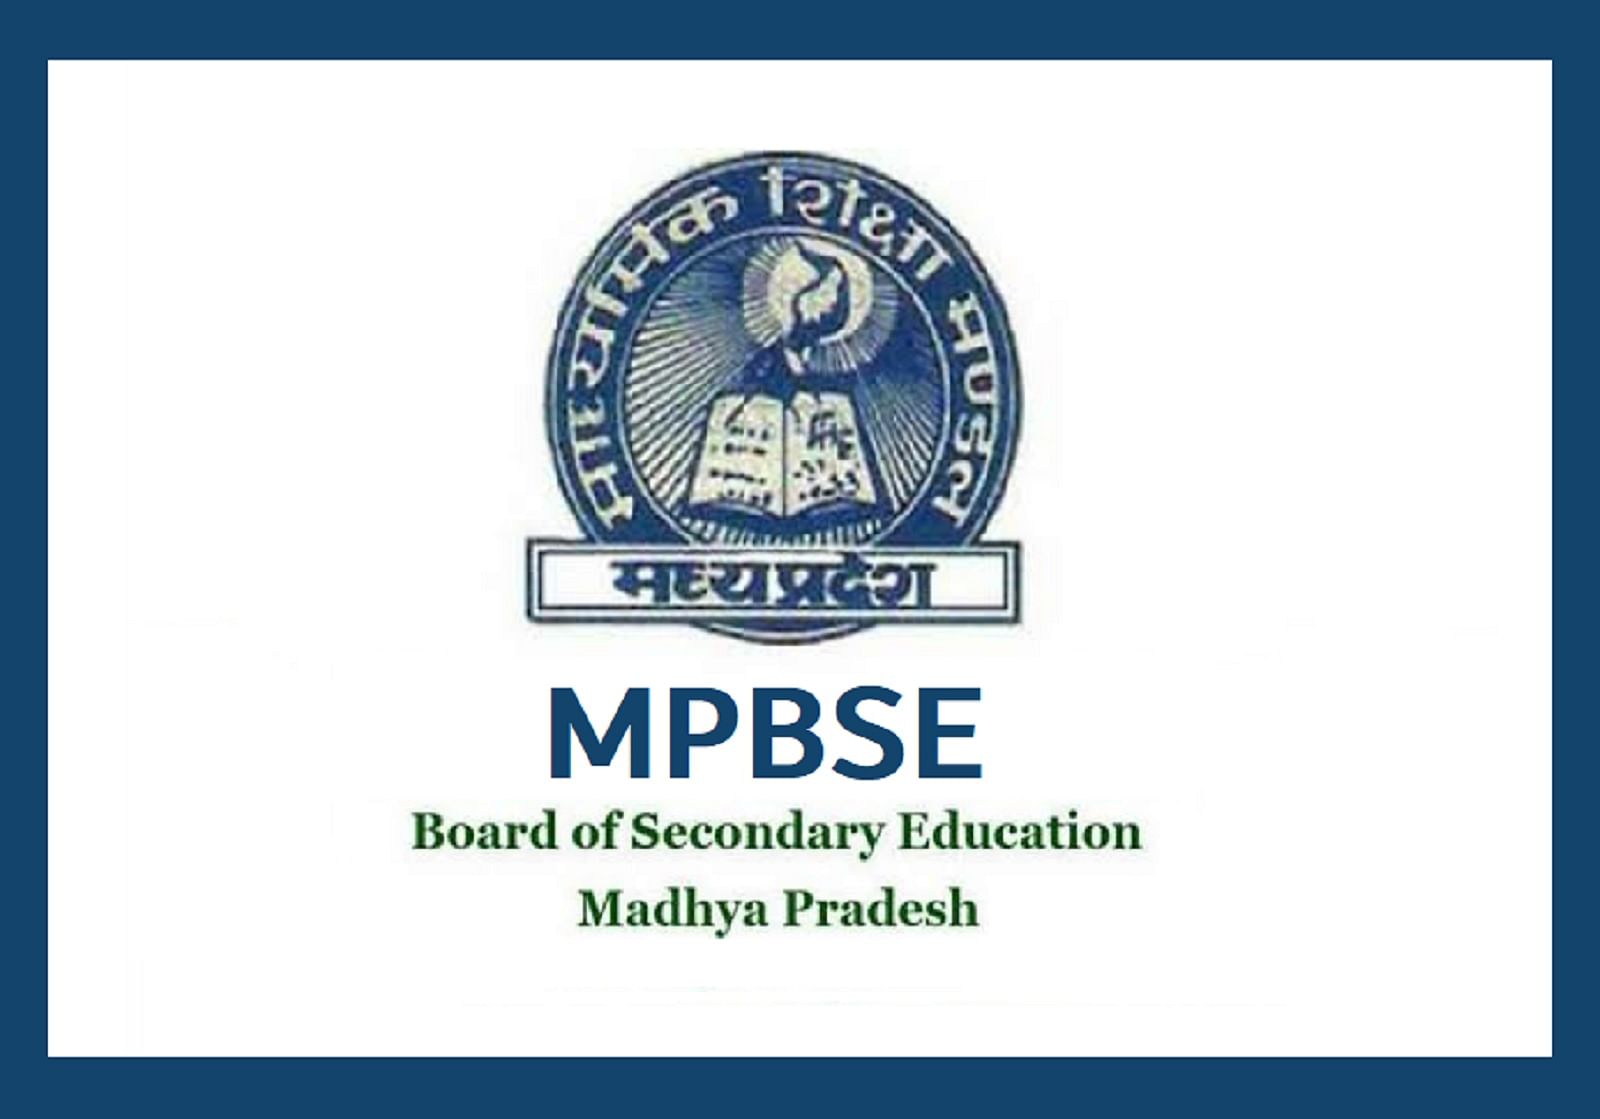 MP Board MPBSE 10th Result  2021 OUT, All Students Declared Pass